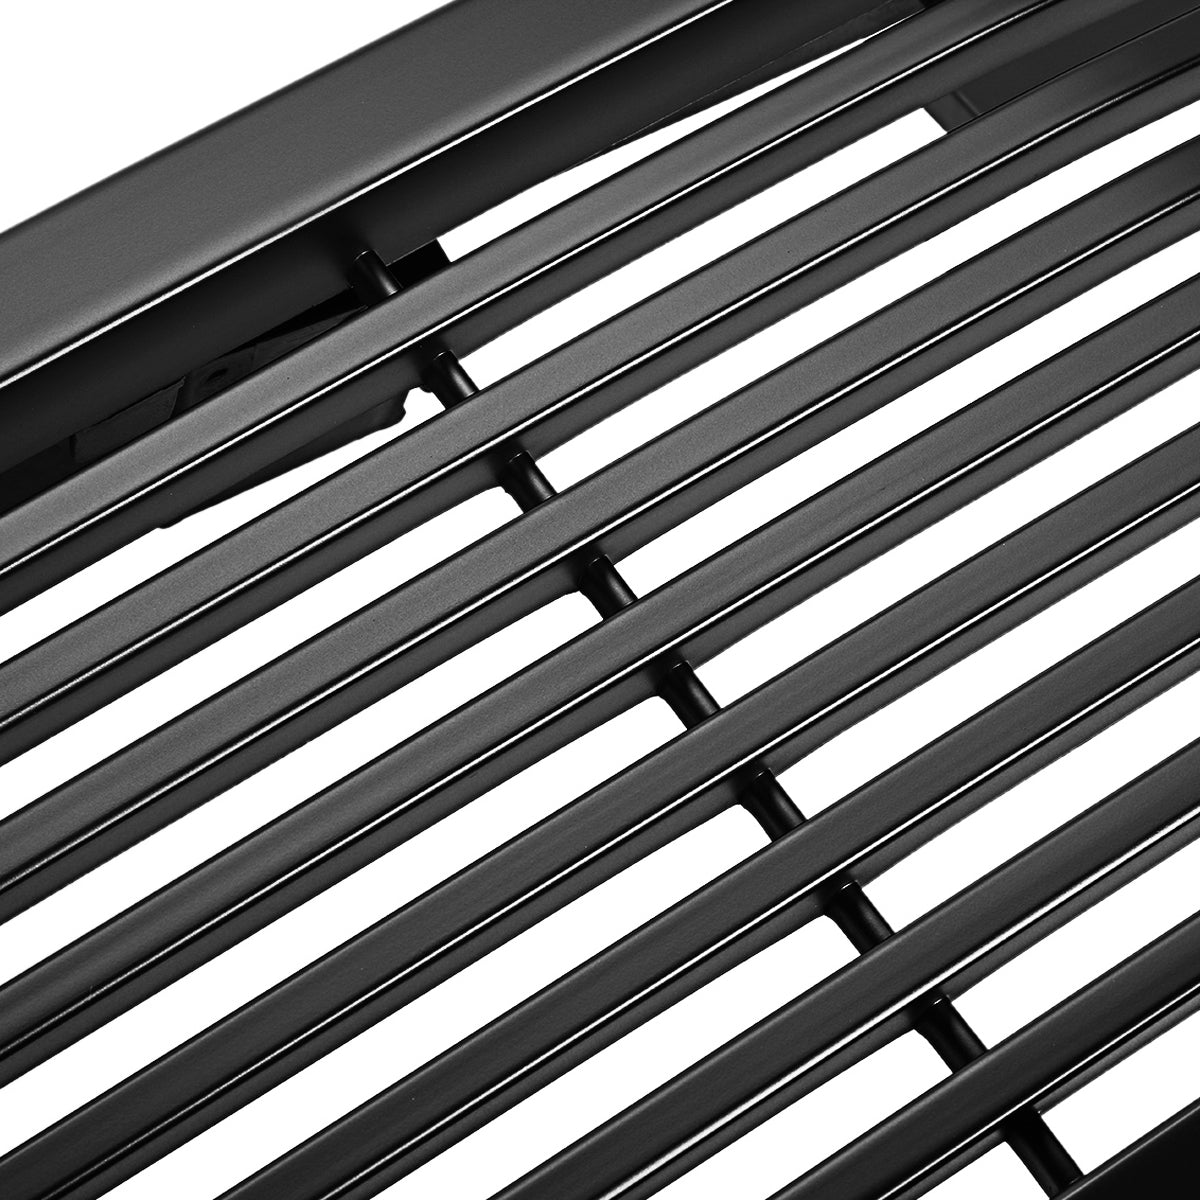 98-04 Chevy S10 Blazer Front Grille - Badgeless Style - Black